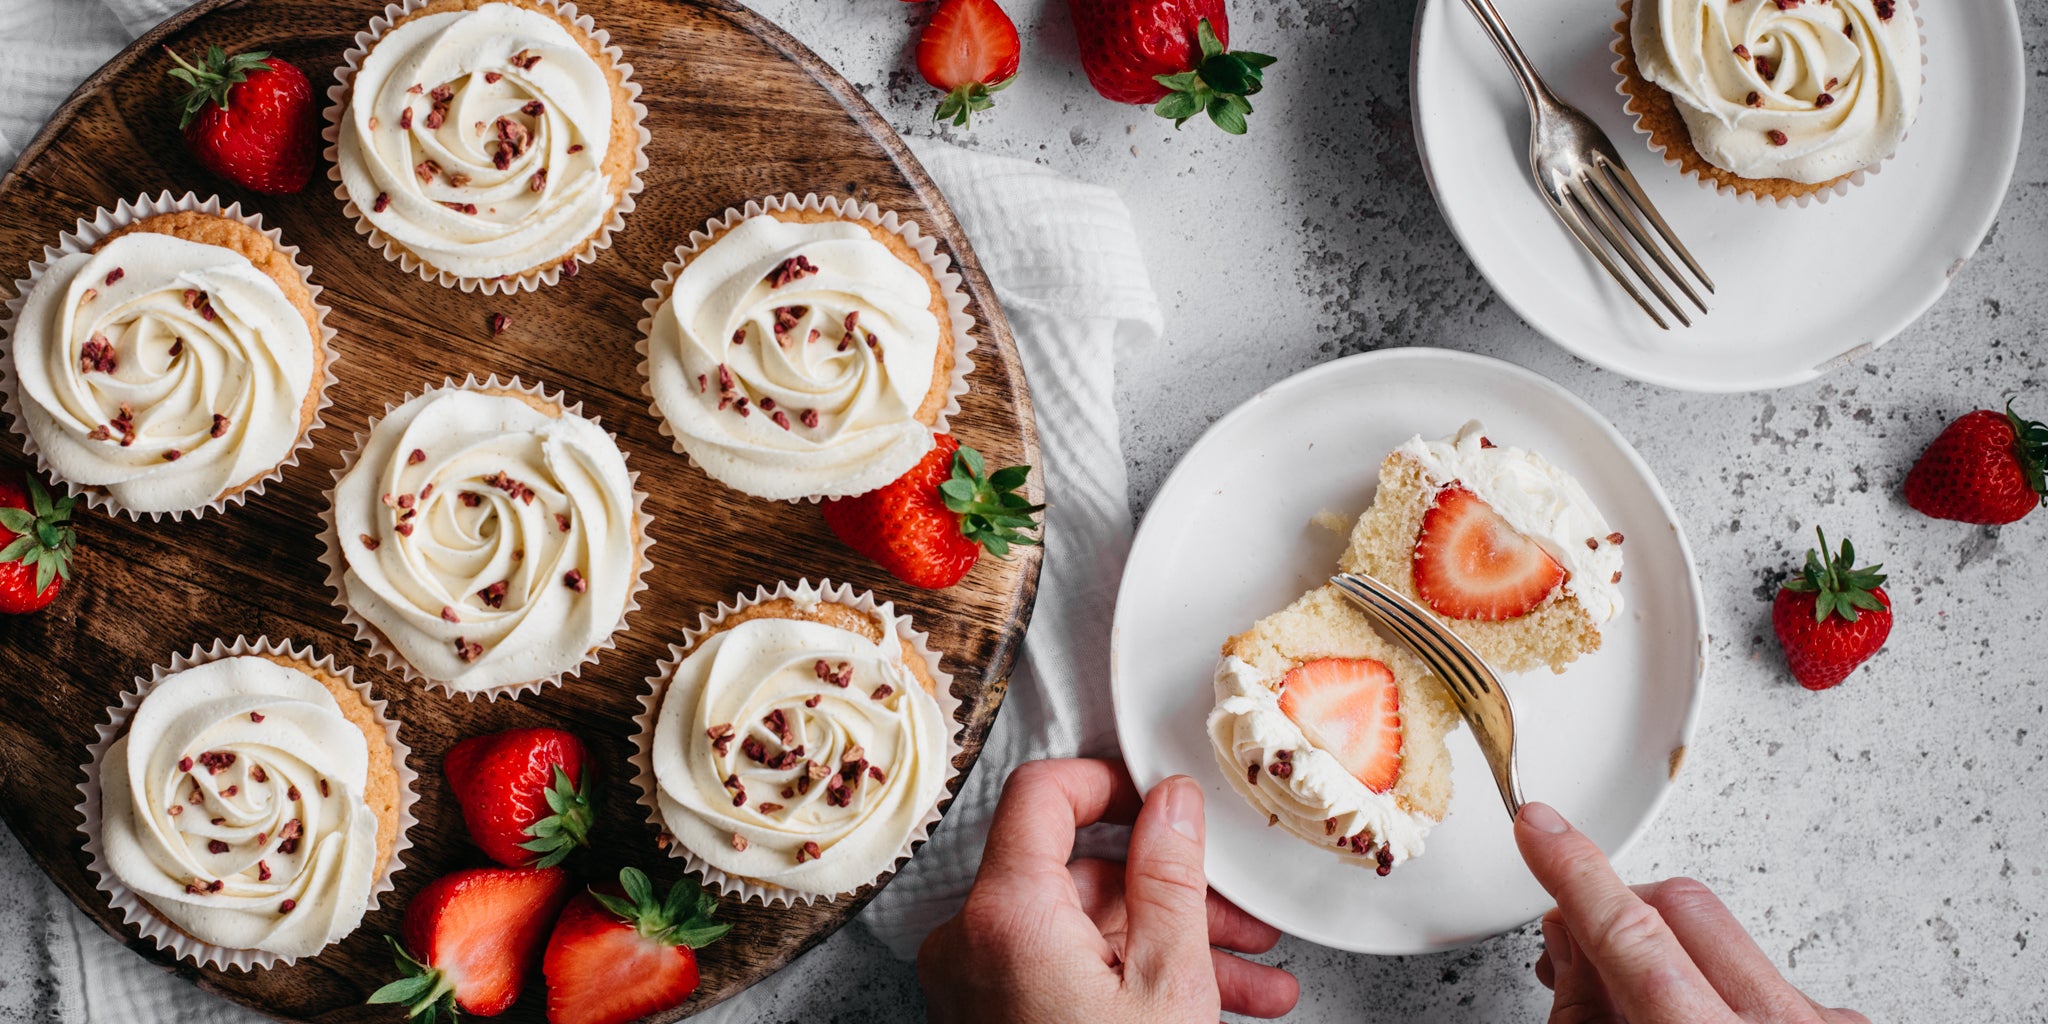 Top down shot of a circle plate of cupcakes and strawberries. A white plate on the right side with a cupcake cut in half and a hand holding a fork